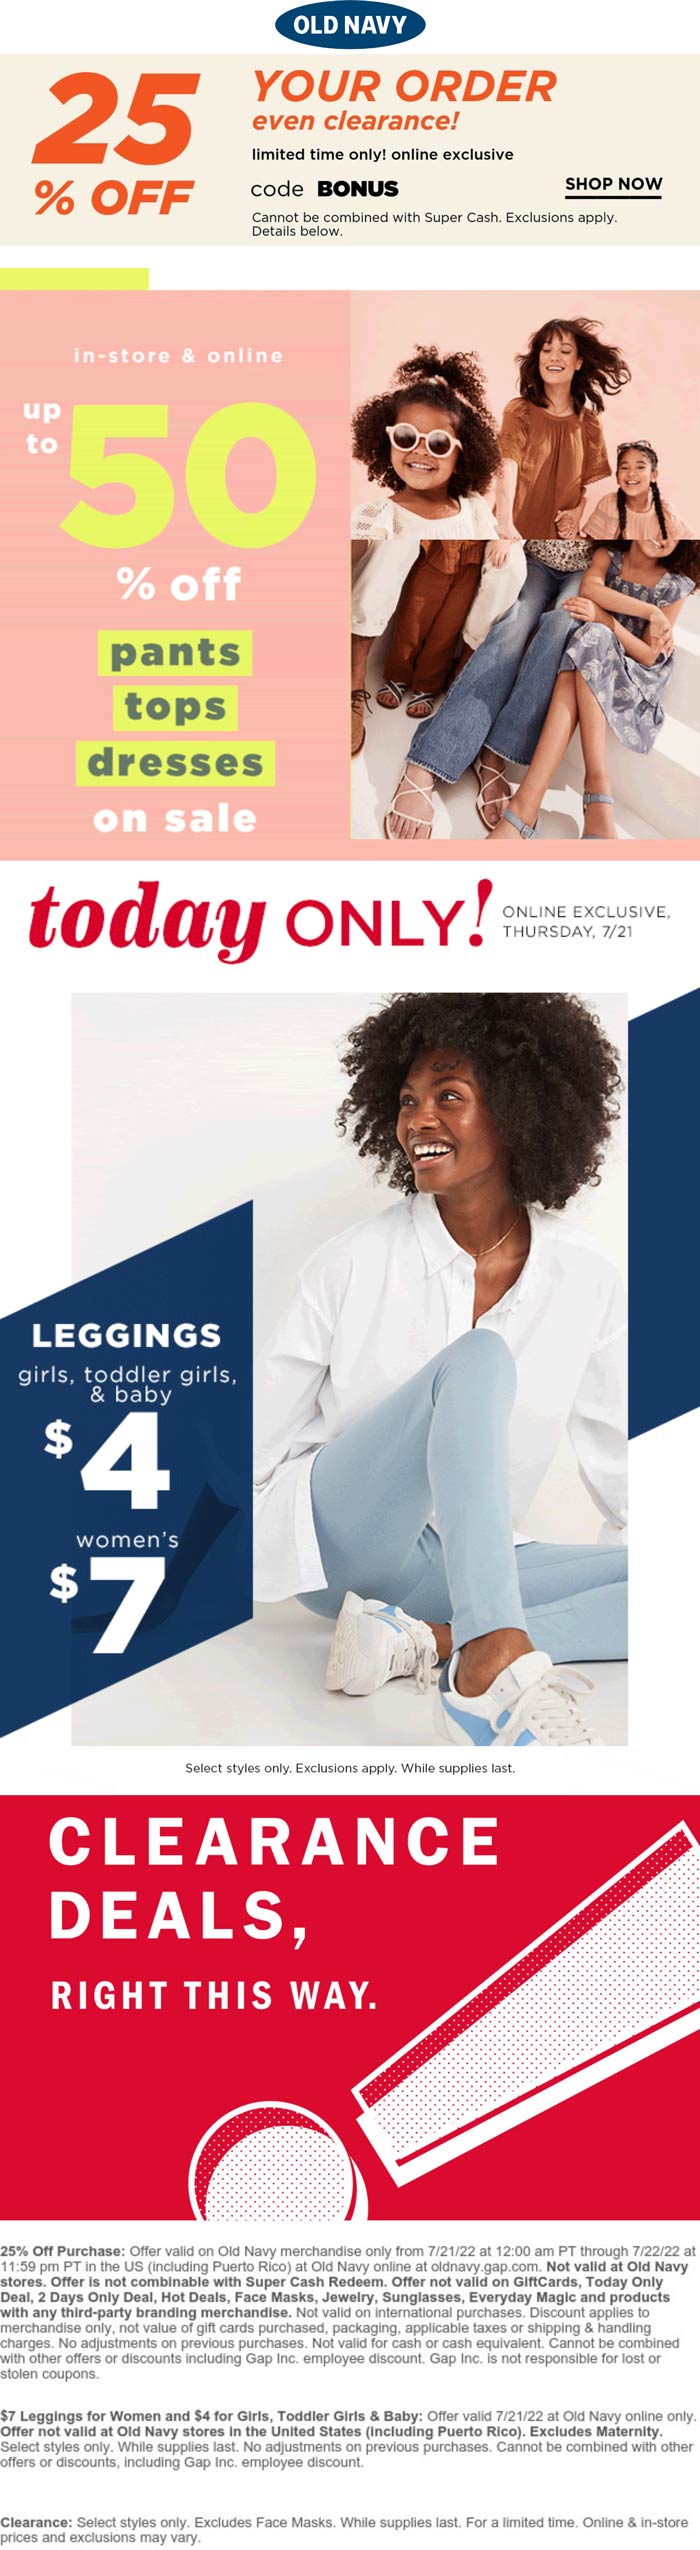 Old Navy stores Coupon  25% off everything today online at Old Navy via promo code BONUS #oldnavy 